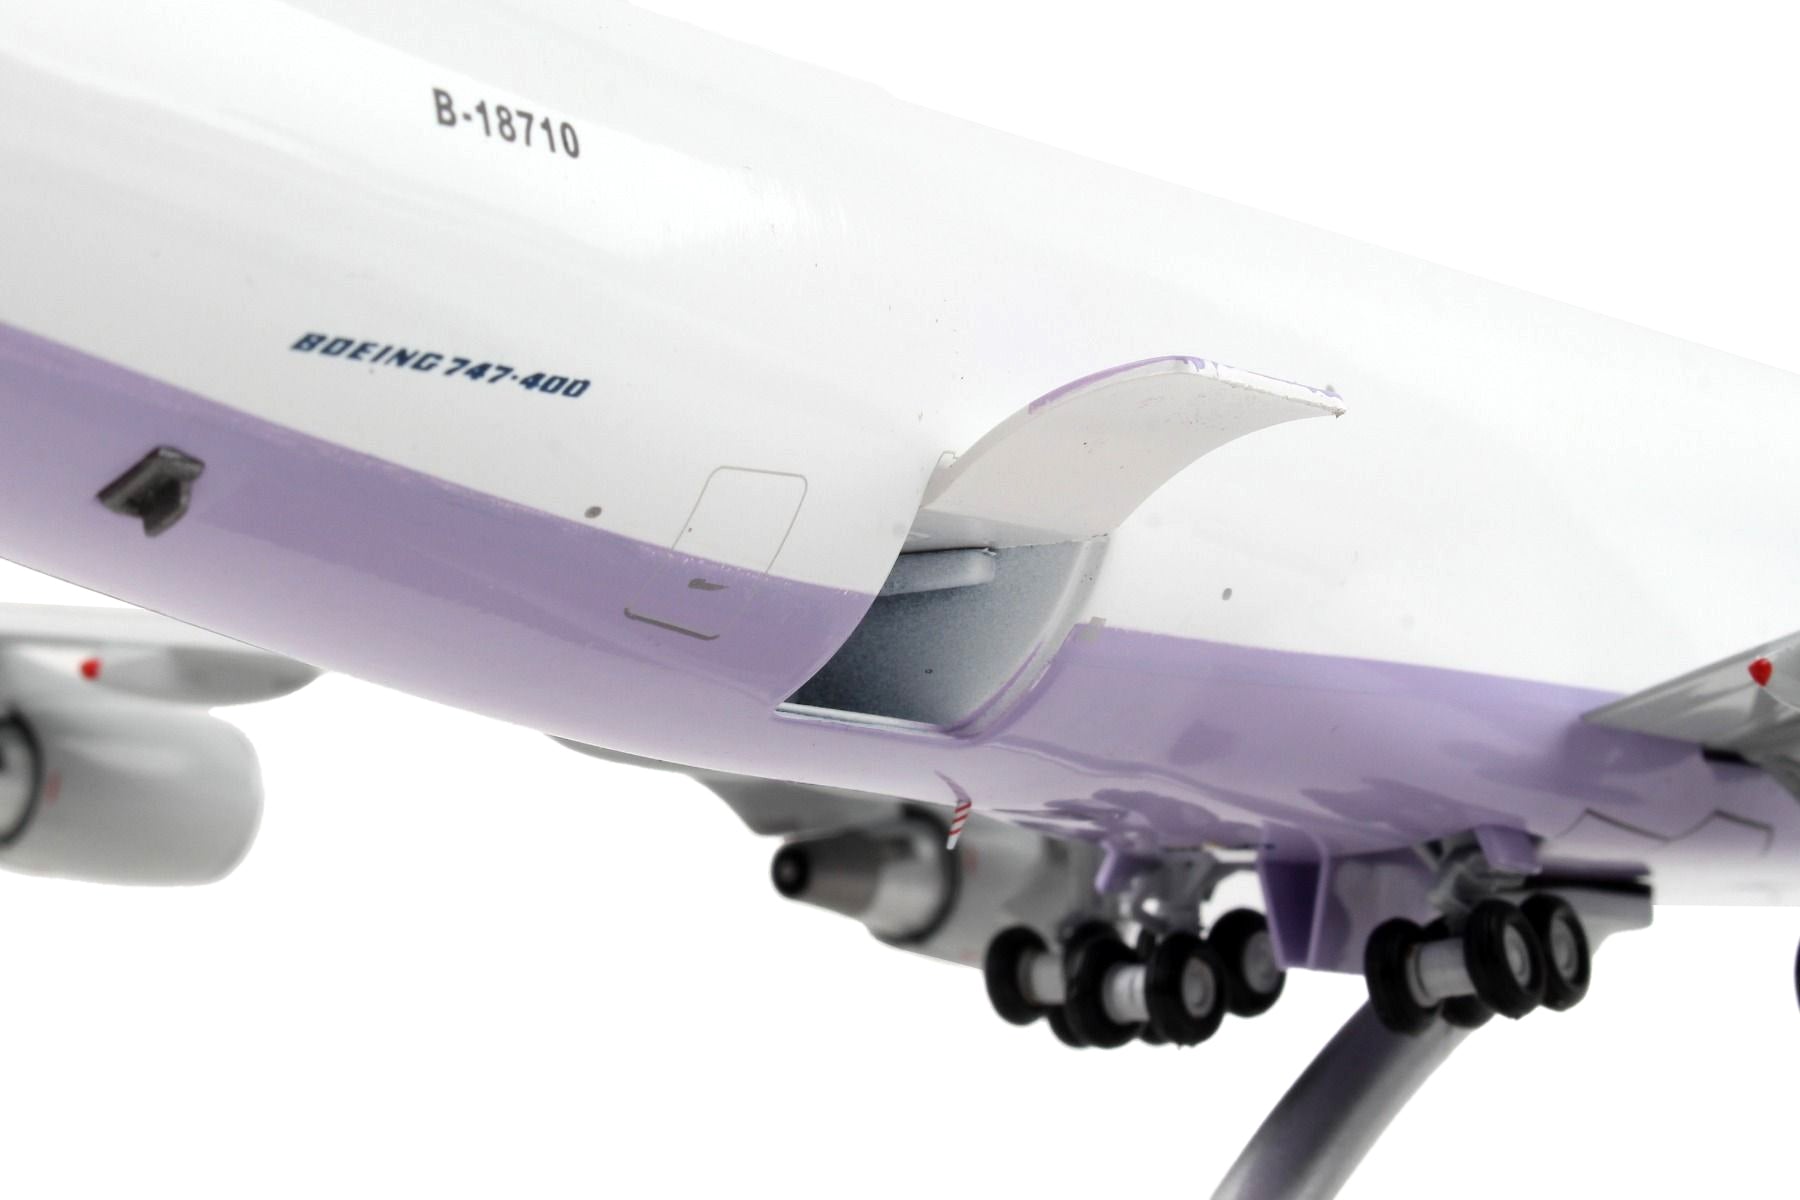 Boeing 747-400F Commercial Aircraft "China Airlines Cargo" White with Purple Tail